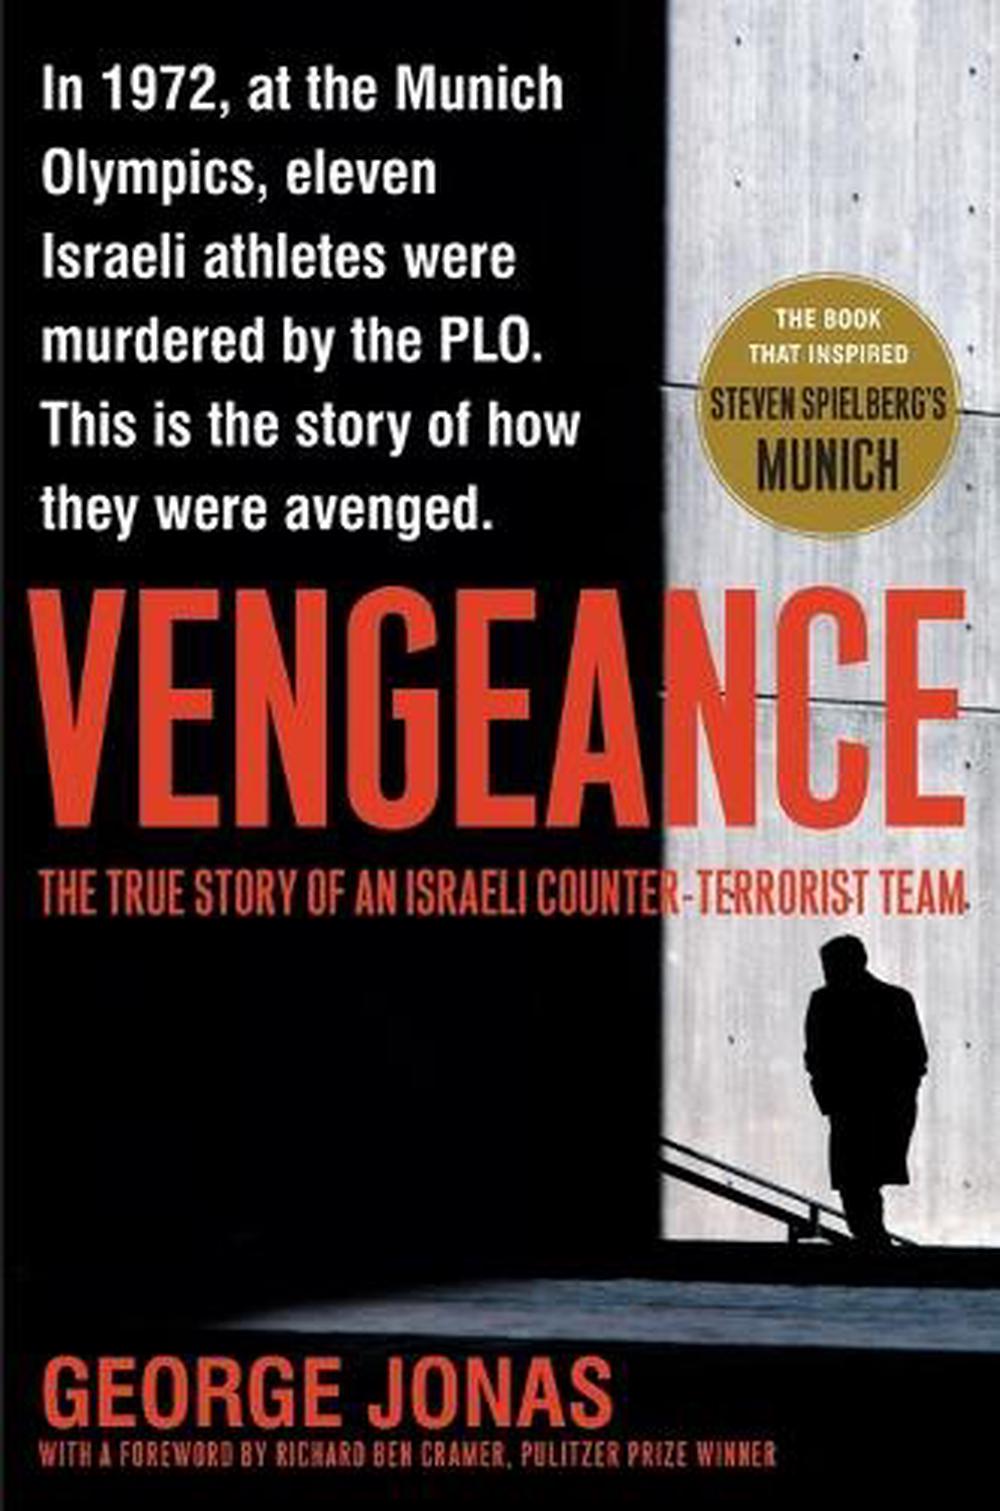 is acts of vengeance true story